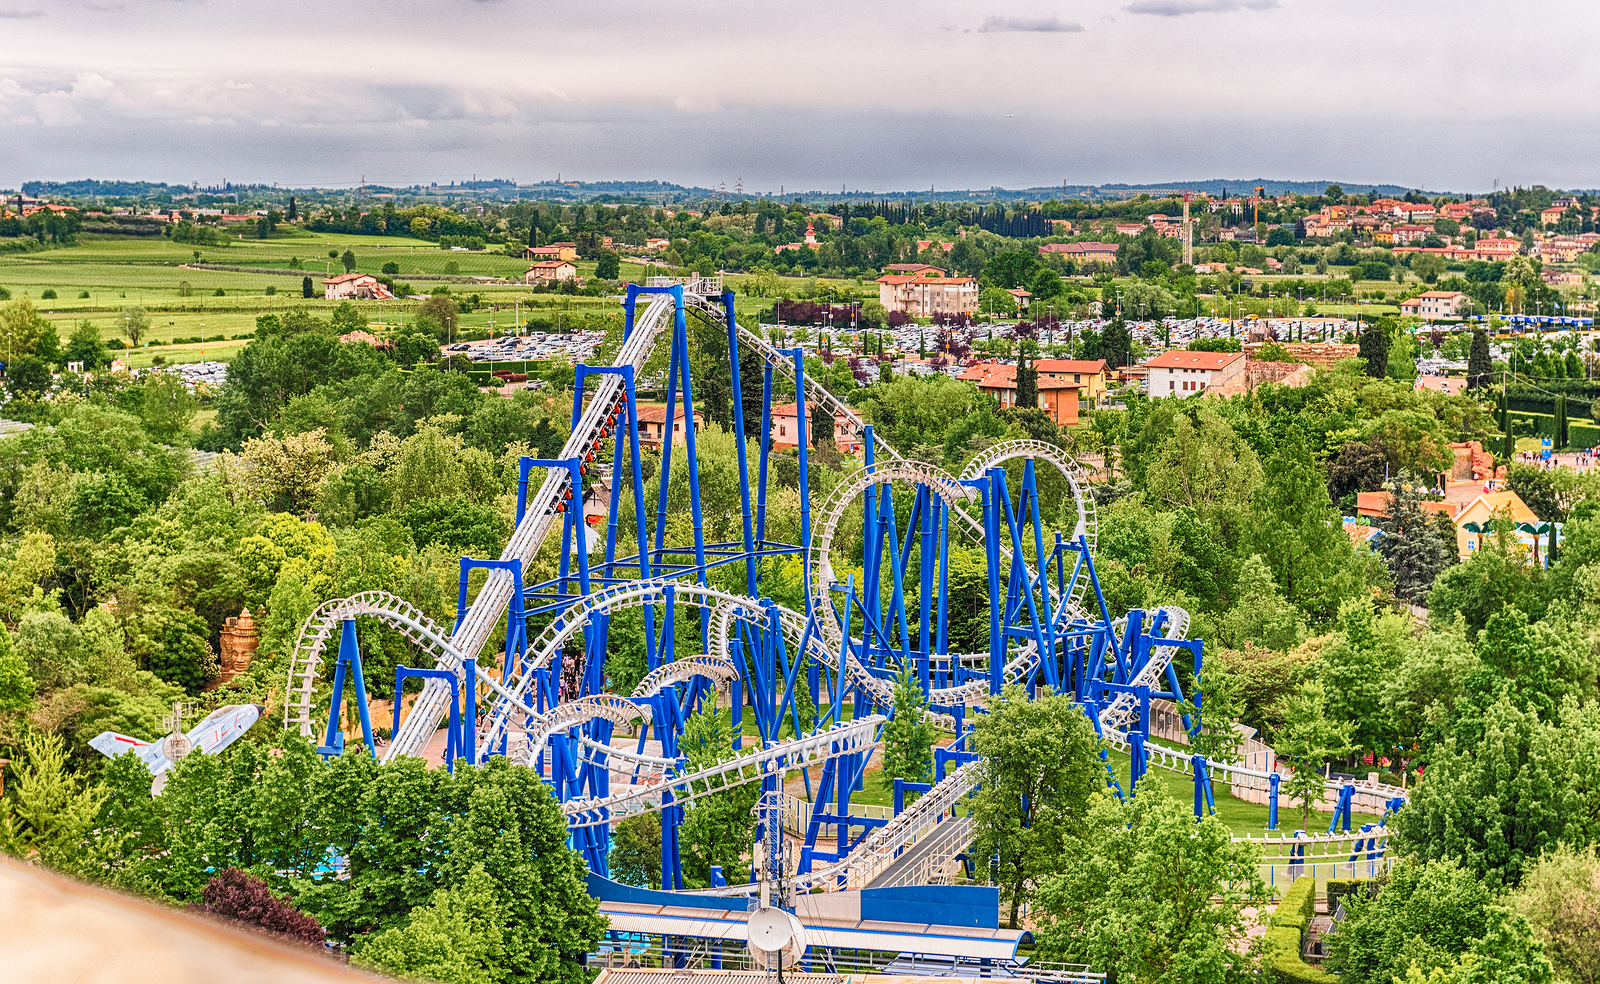 7 Best Theme Parks In Europe